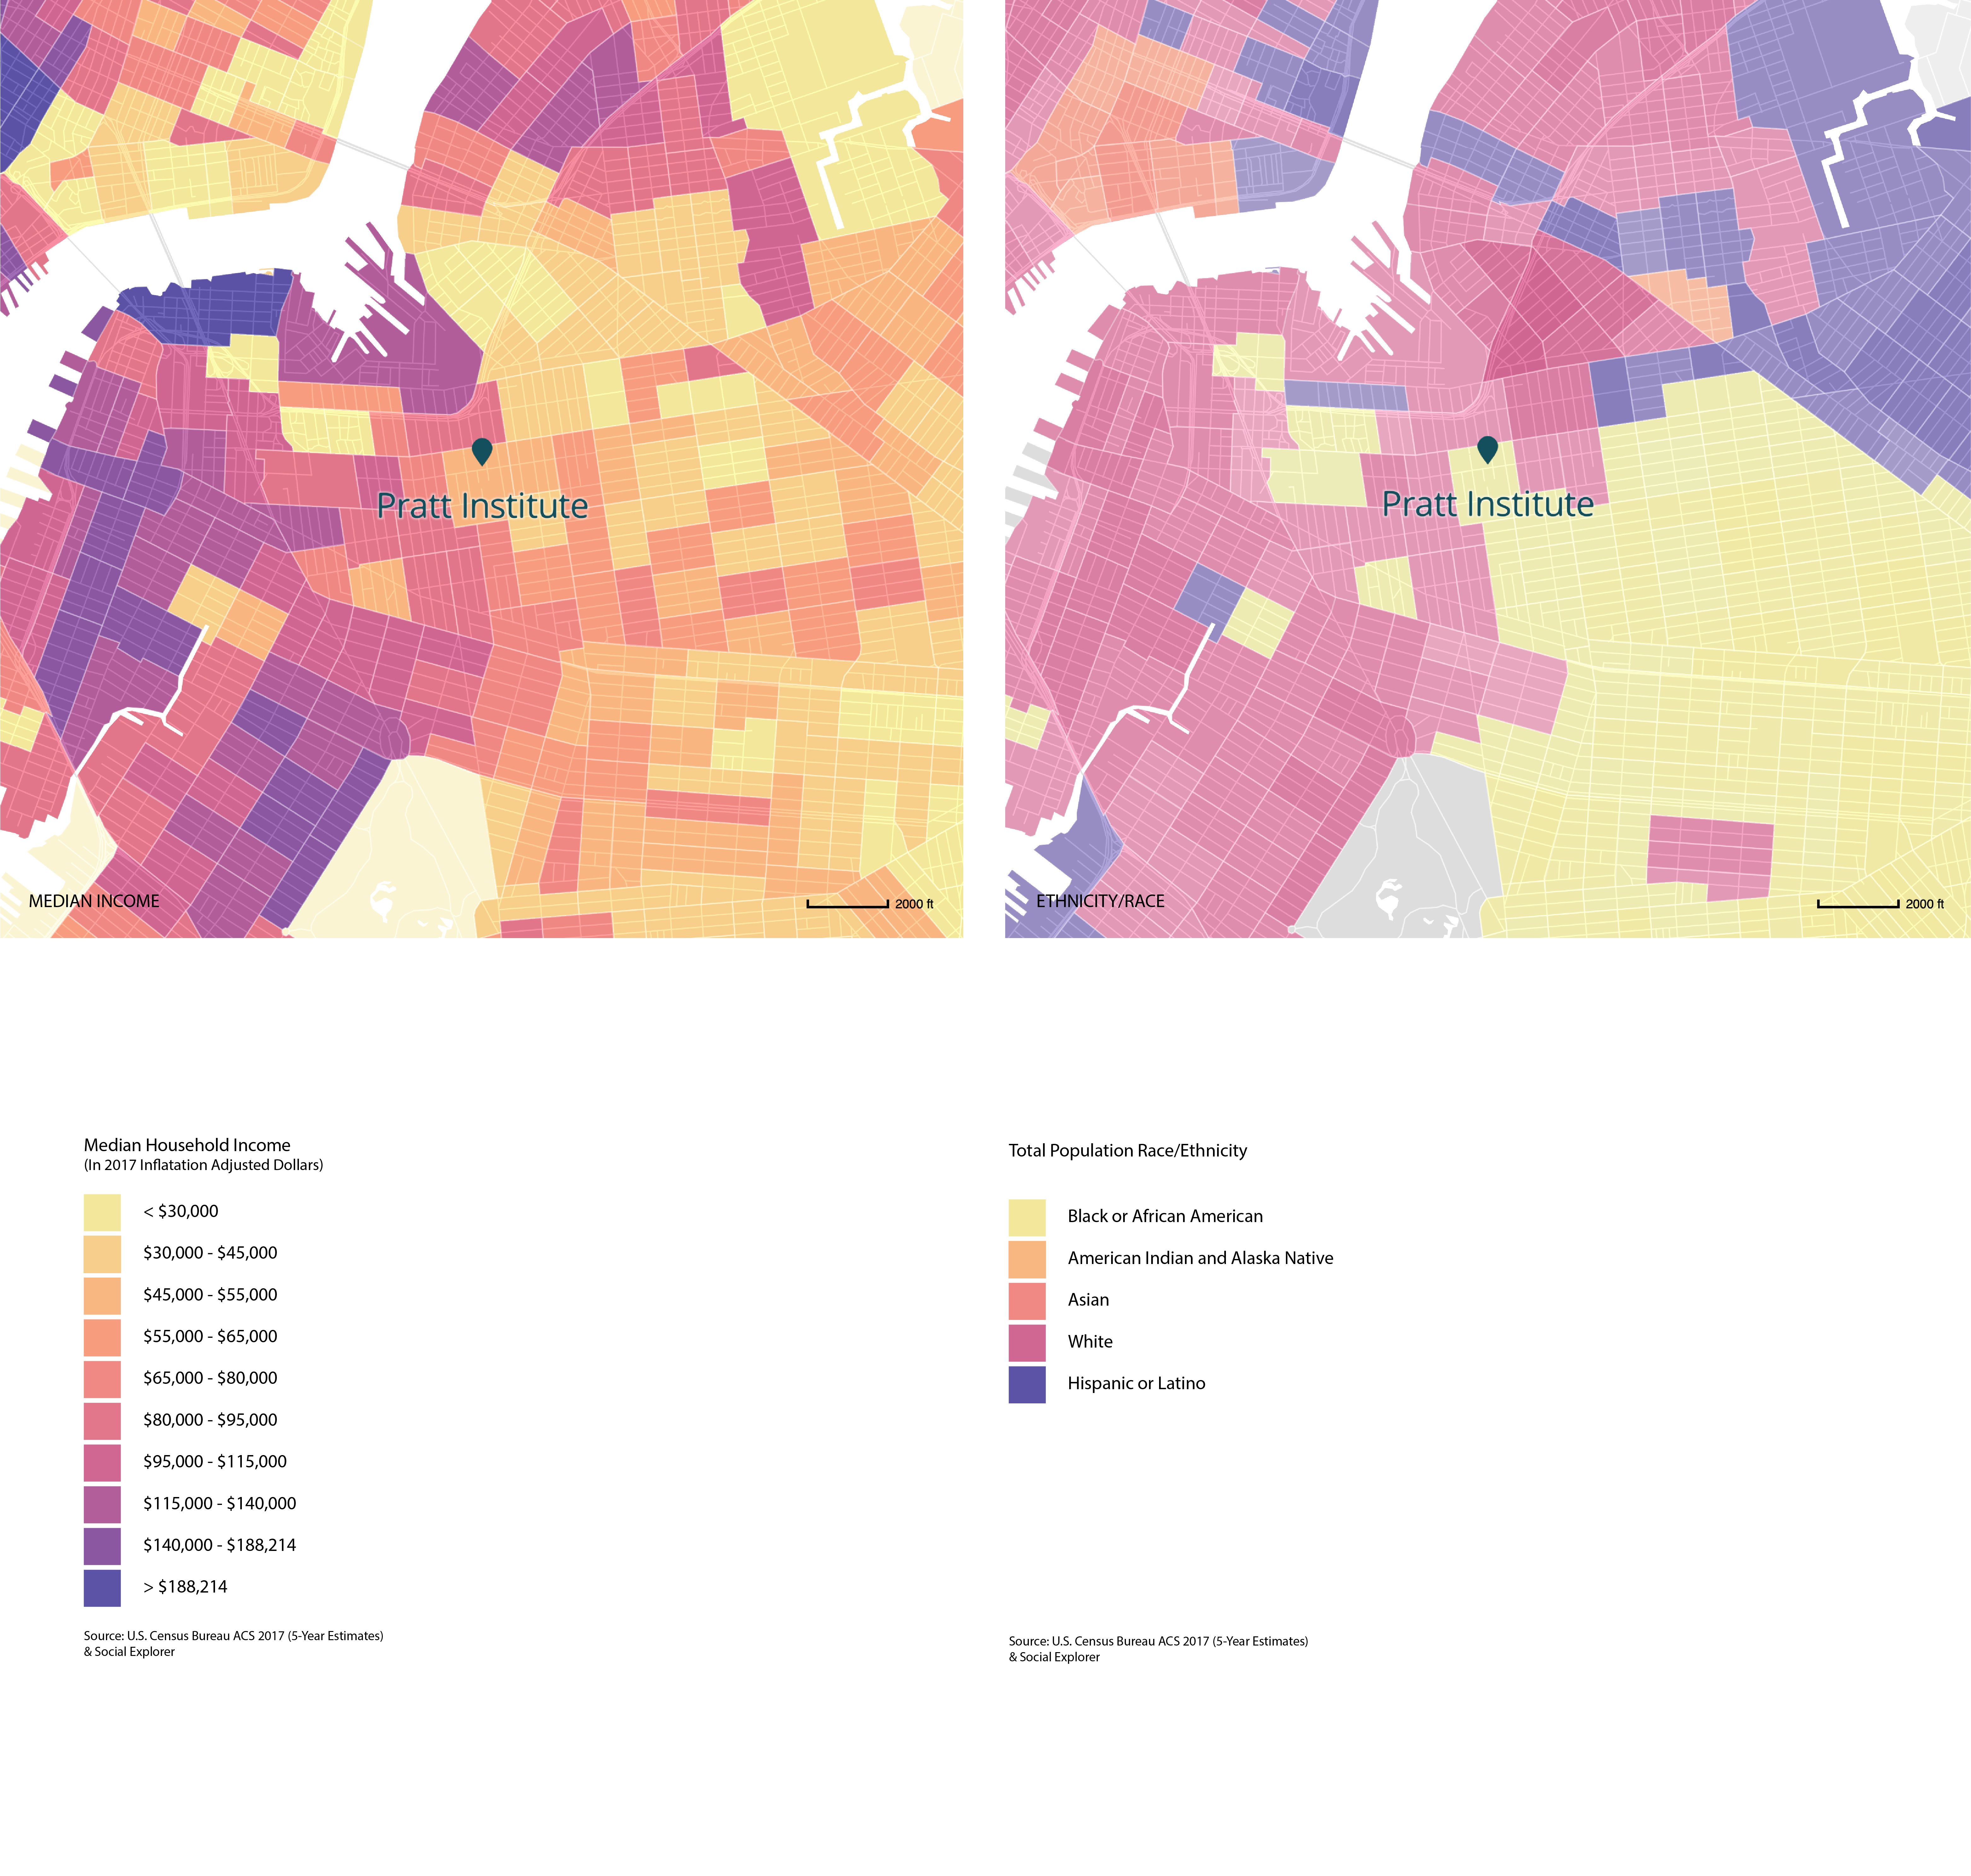 Two maps of downtown Brooklyn and surrounding areas and the Lower East Side with the Pratt Institute marked in the center show census blocks in red, purple, orange, and yellow showing income and race. Pratt is in a predominantly Black area with moderate median income